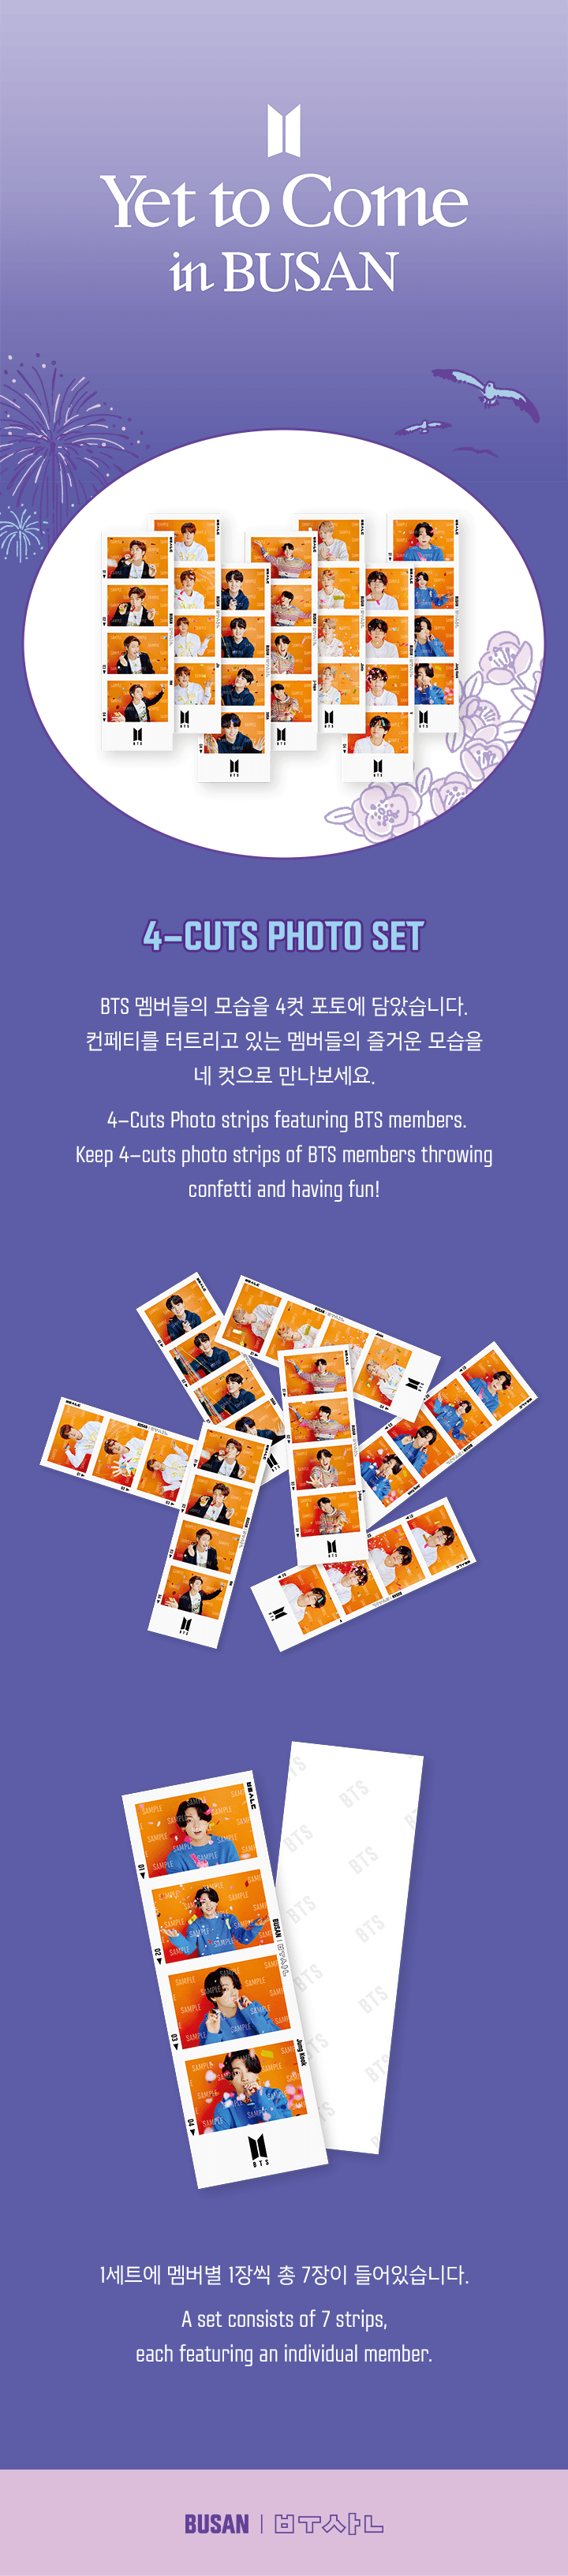 Fast Shipping for BTS Yet to Come in BUSAN concert MD photocard merchandise. 4-Cuts Photo Set Seoul. Buy from a huge collection of albums & official merch at the best online kpop store marketplace in Manchester UK. Our shop sells Bangtan Boys BT21 TXT Blackpink & Stray Kids. Sales count to GAON & Hanteo Korean charts.